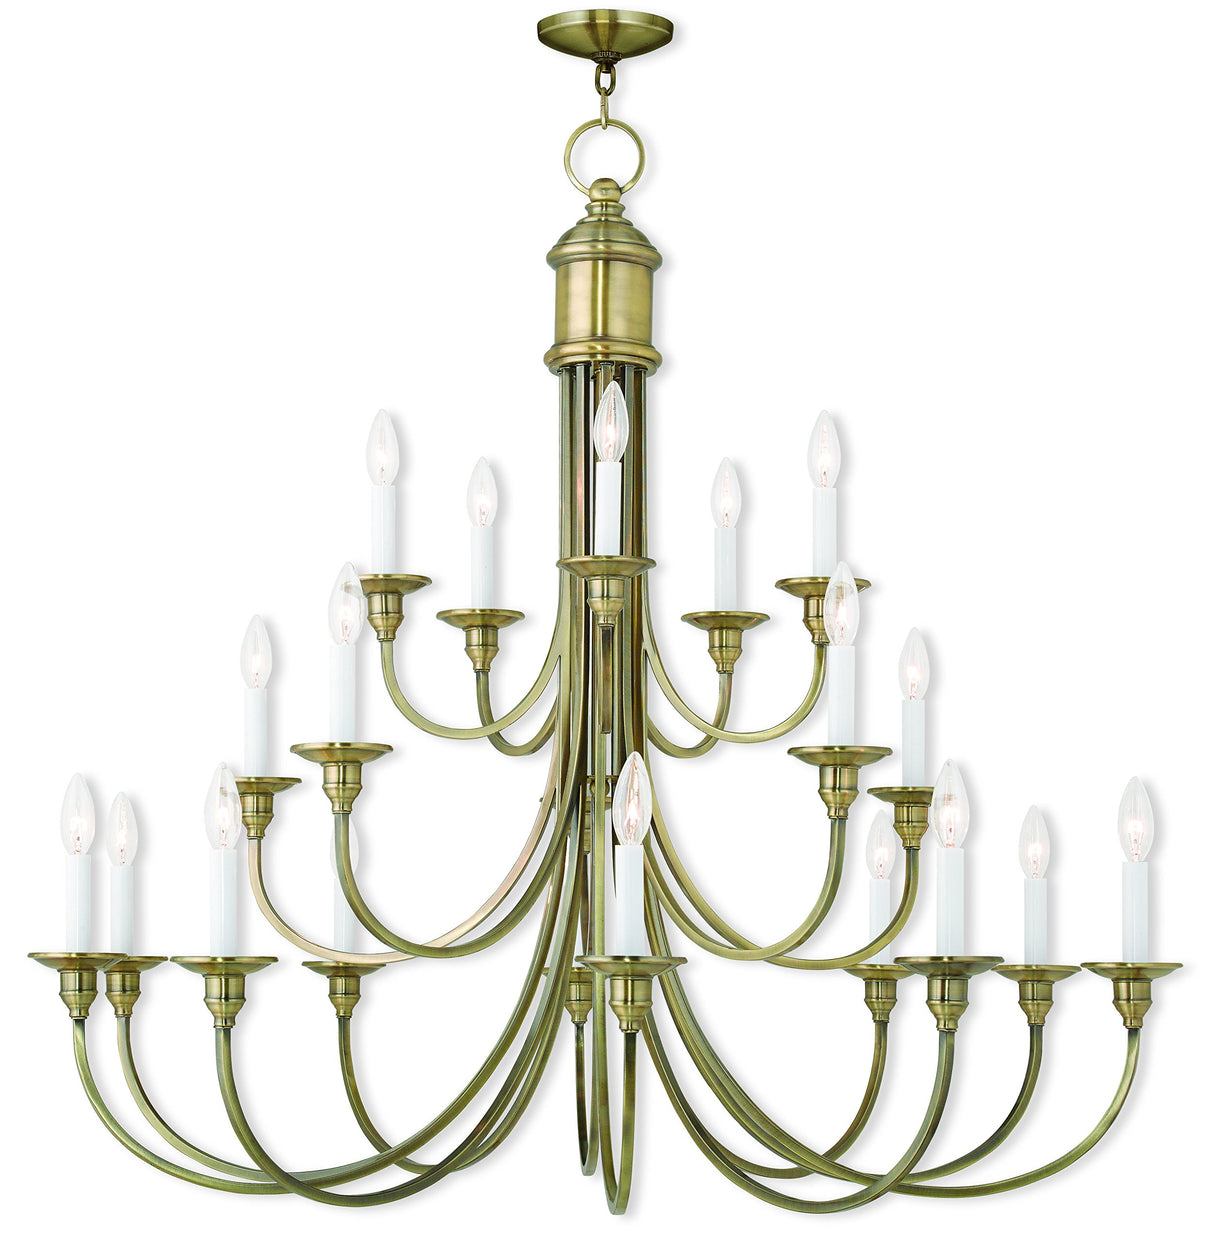 Livex Lighting 5140-01 Traditional 20 Light Foyer Chandelier from Cranford Collection Finish, Antique Brass